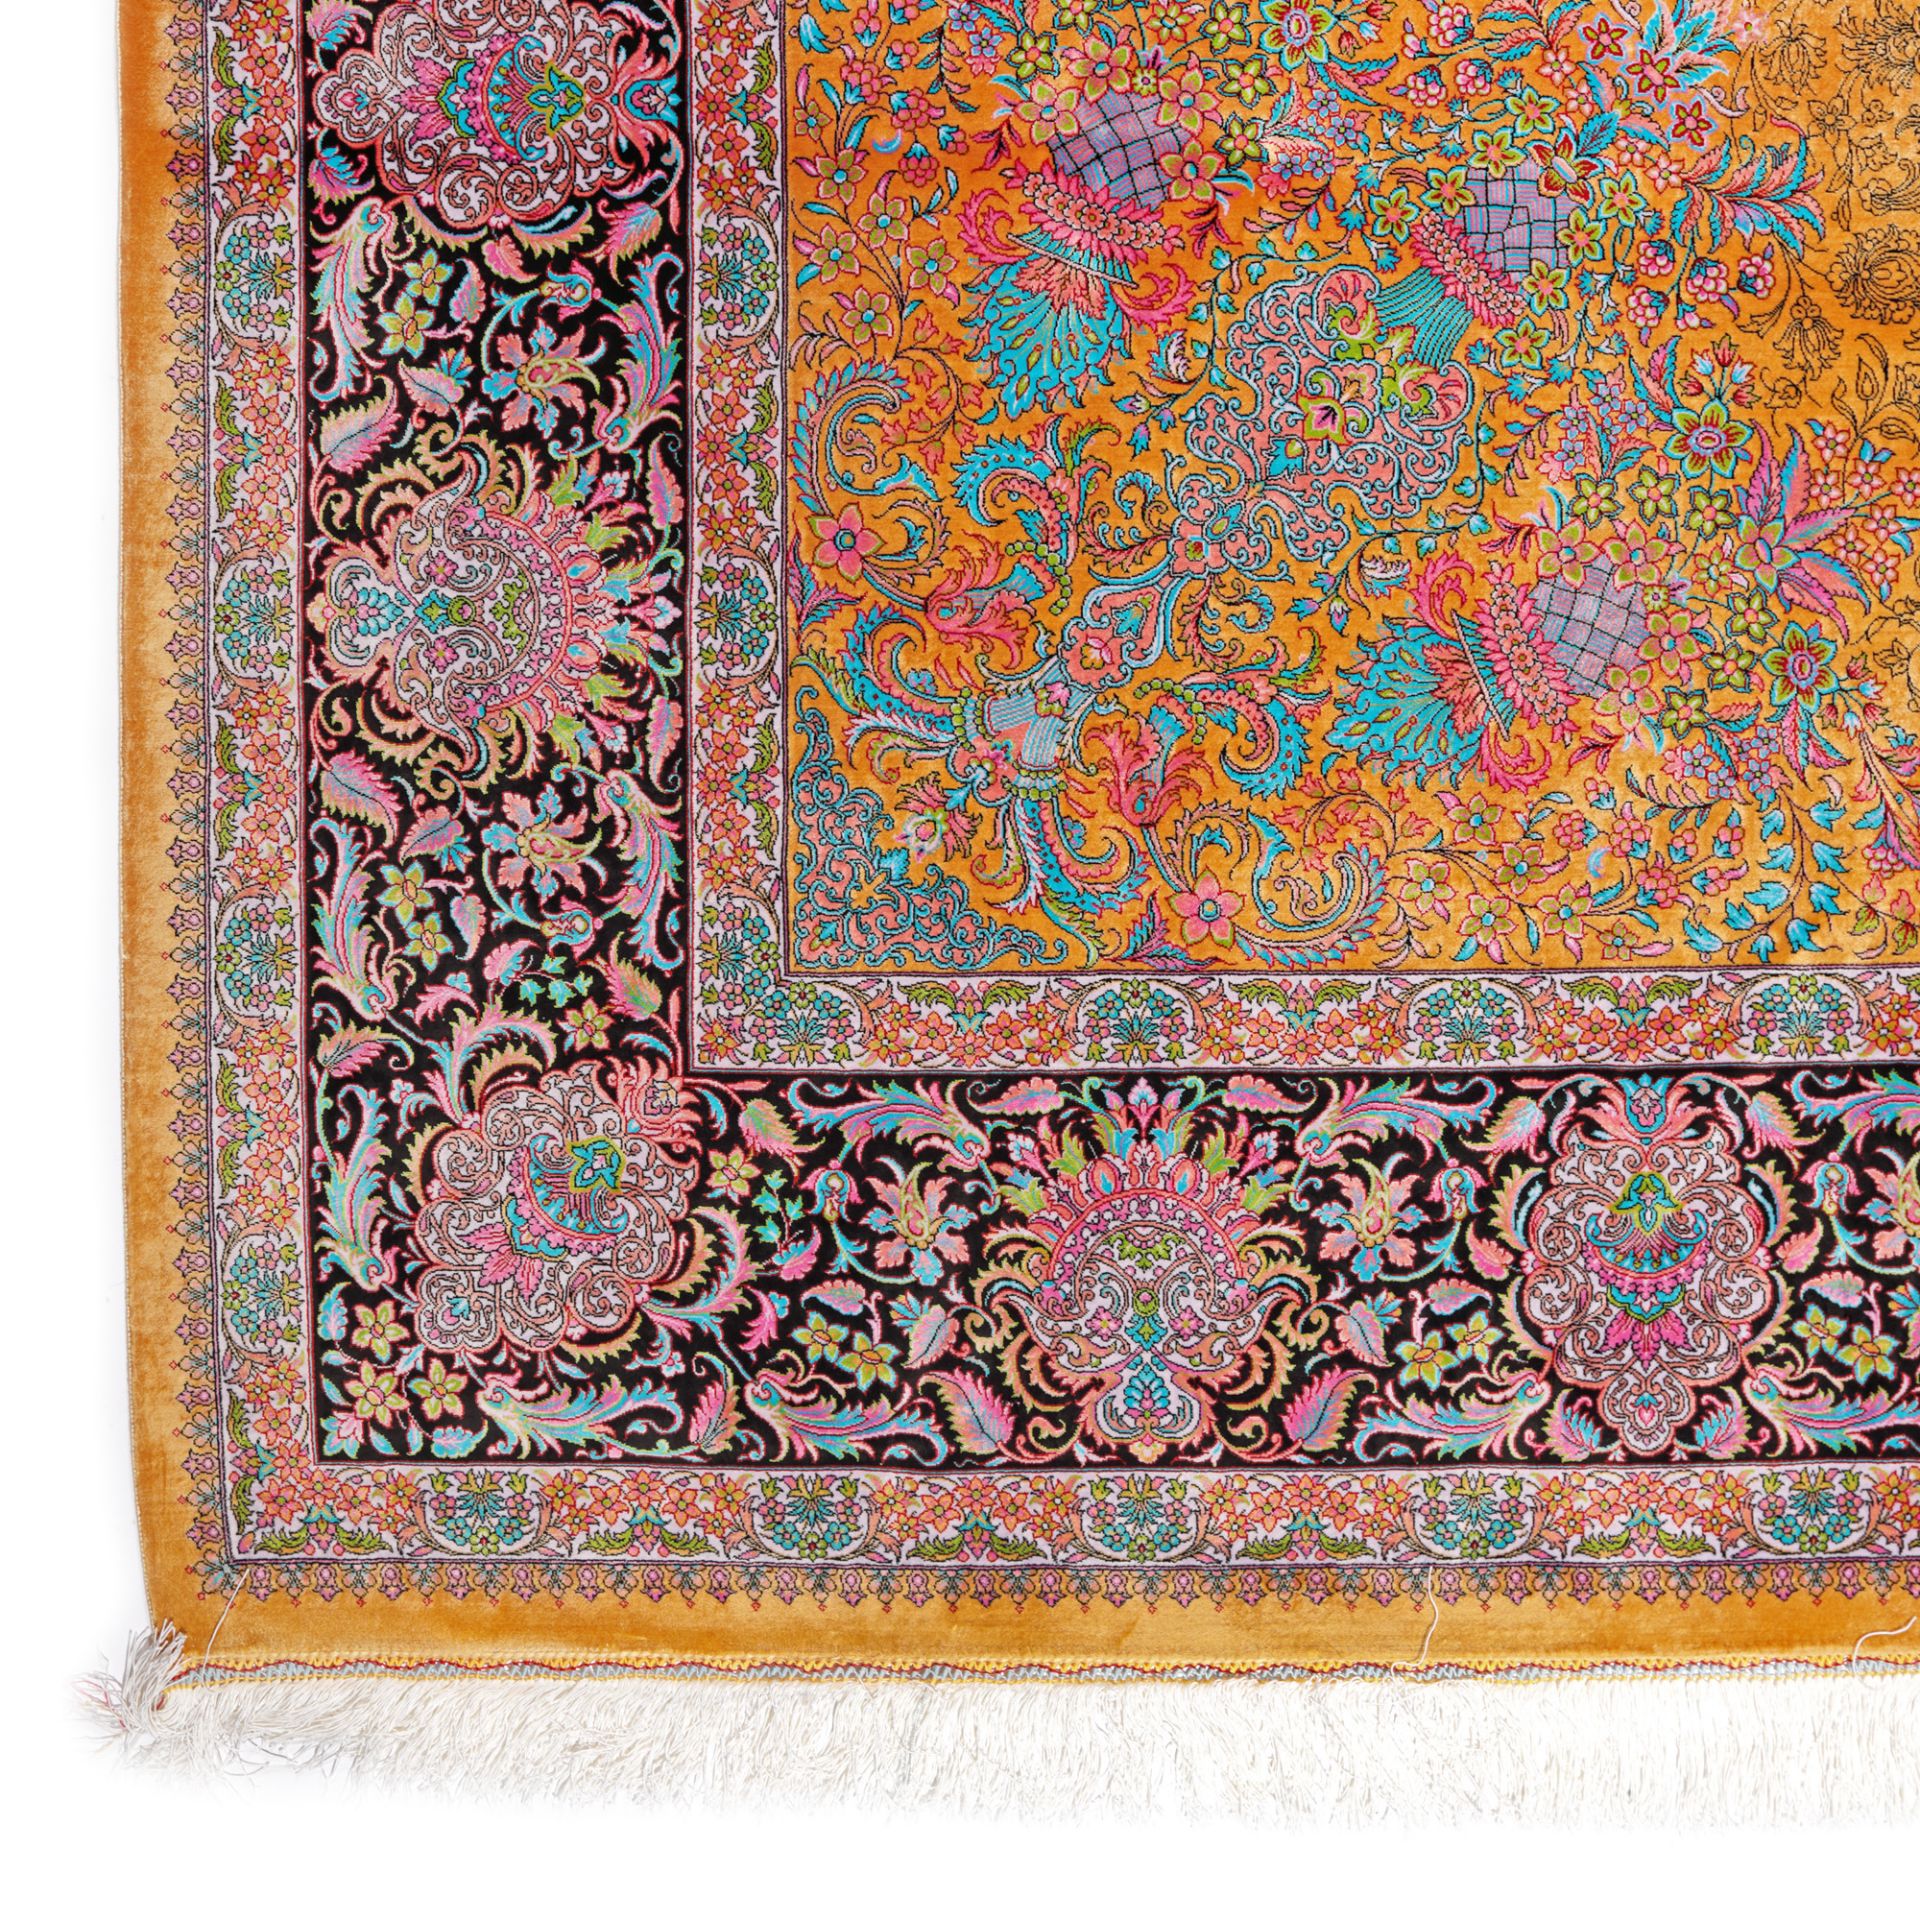 Qum silk rug, richly decorated with floral motifs, Iran - Image 2 of 2